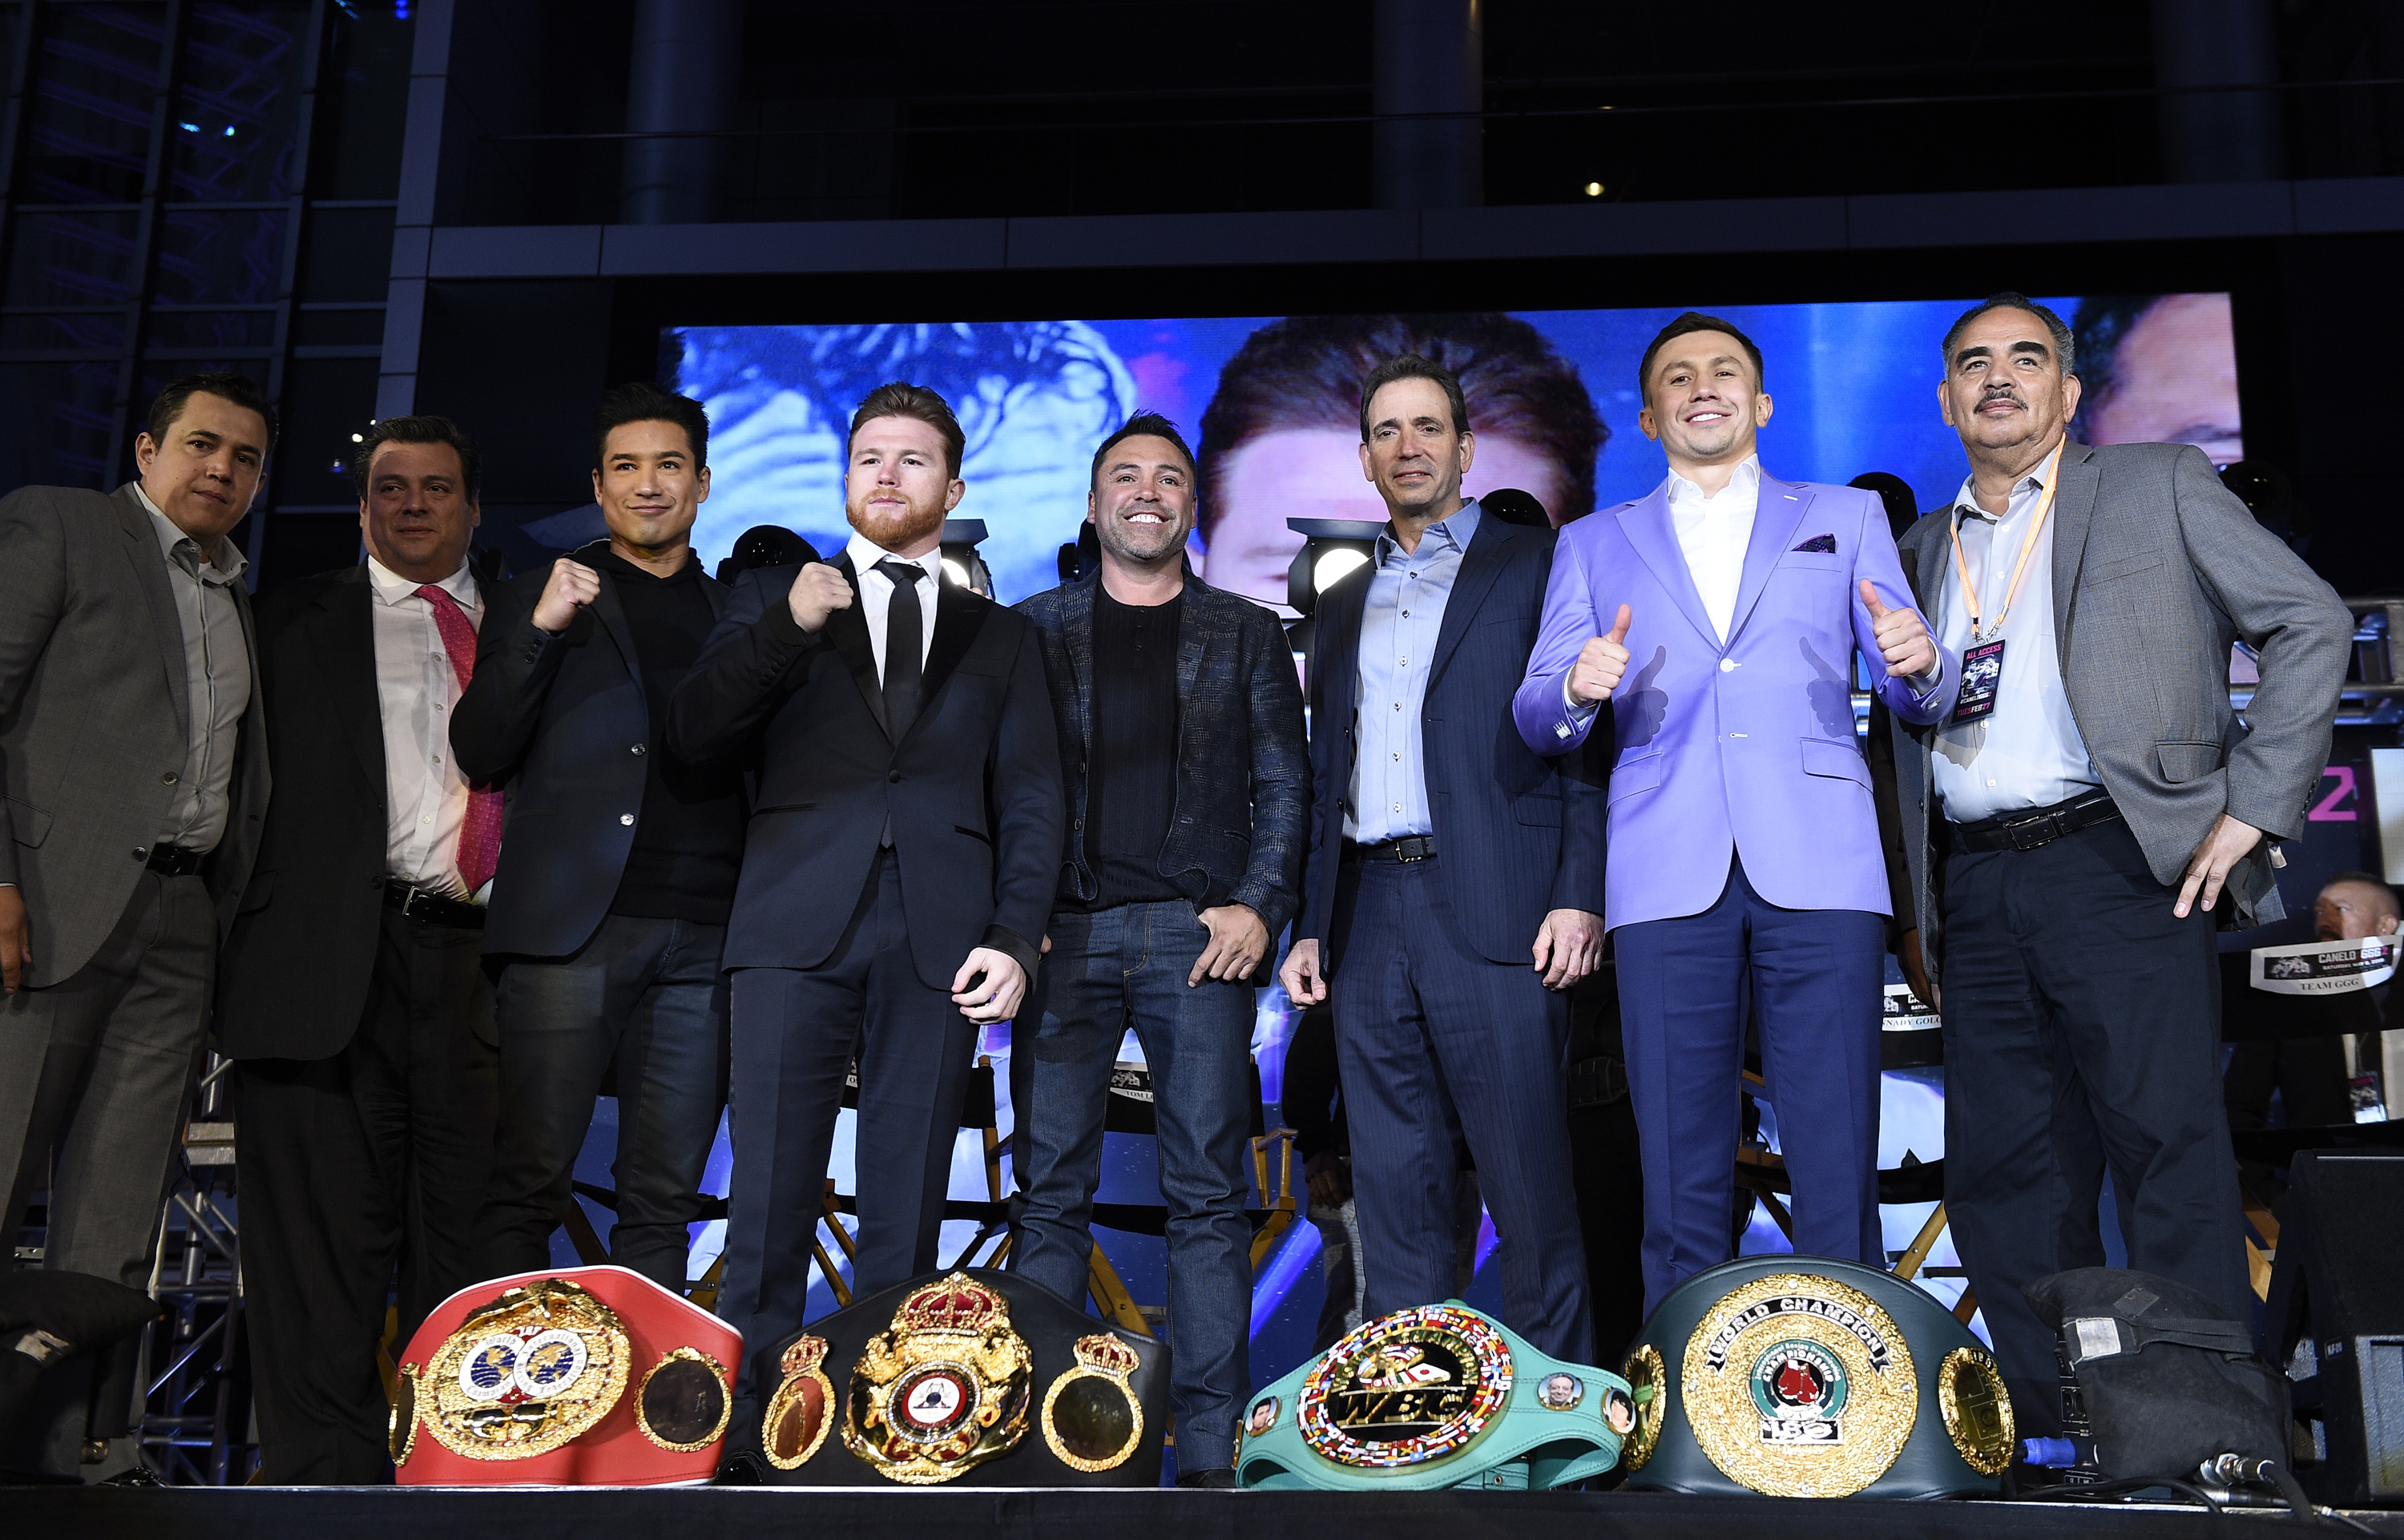 GGG Canelo Feb 2018 Press Conference Getty